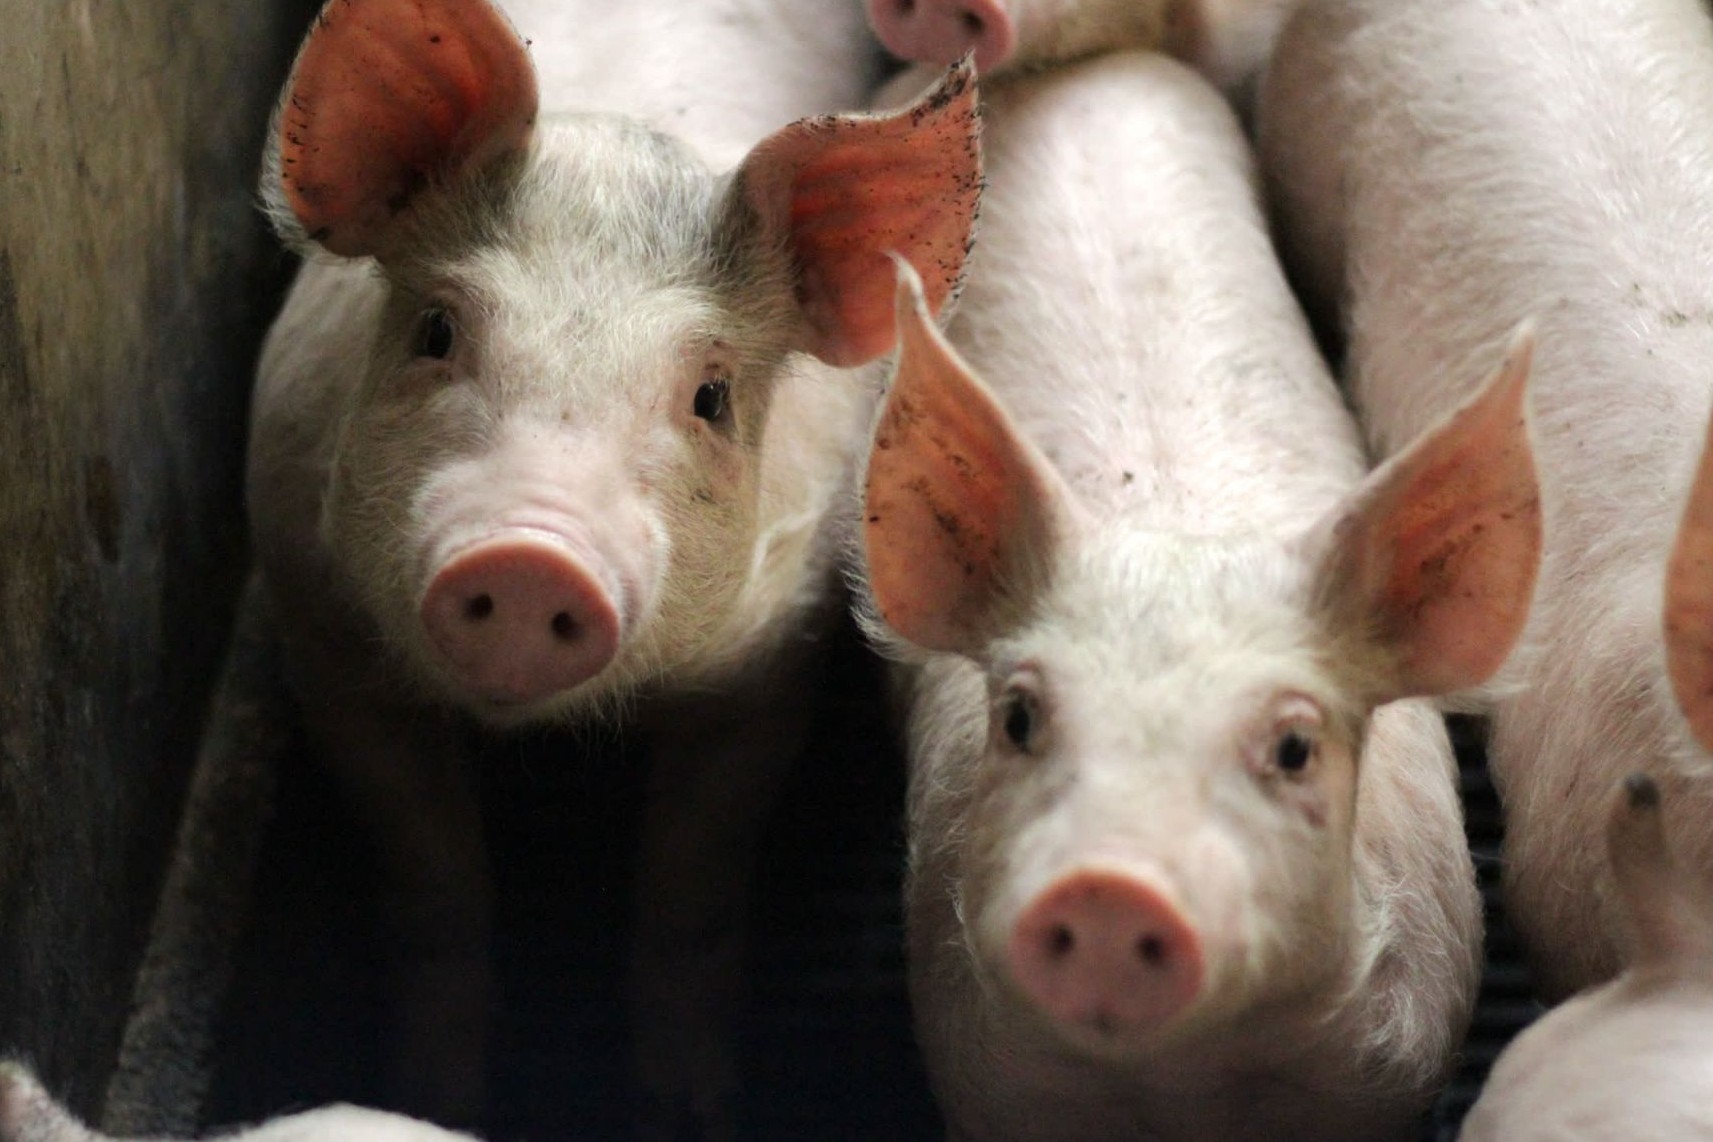 Pigs on a farm in the EU - World Animal Protection - Animals in farming